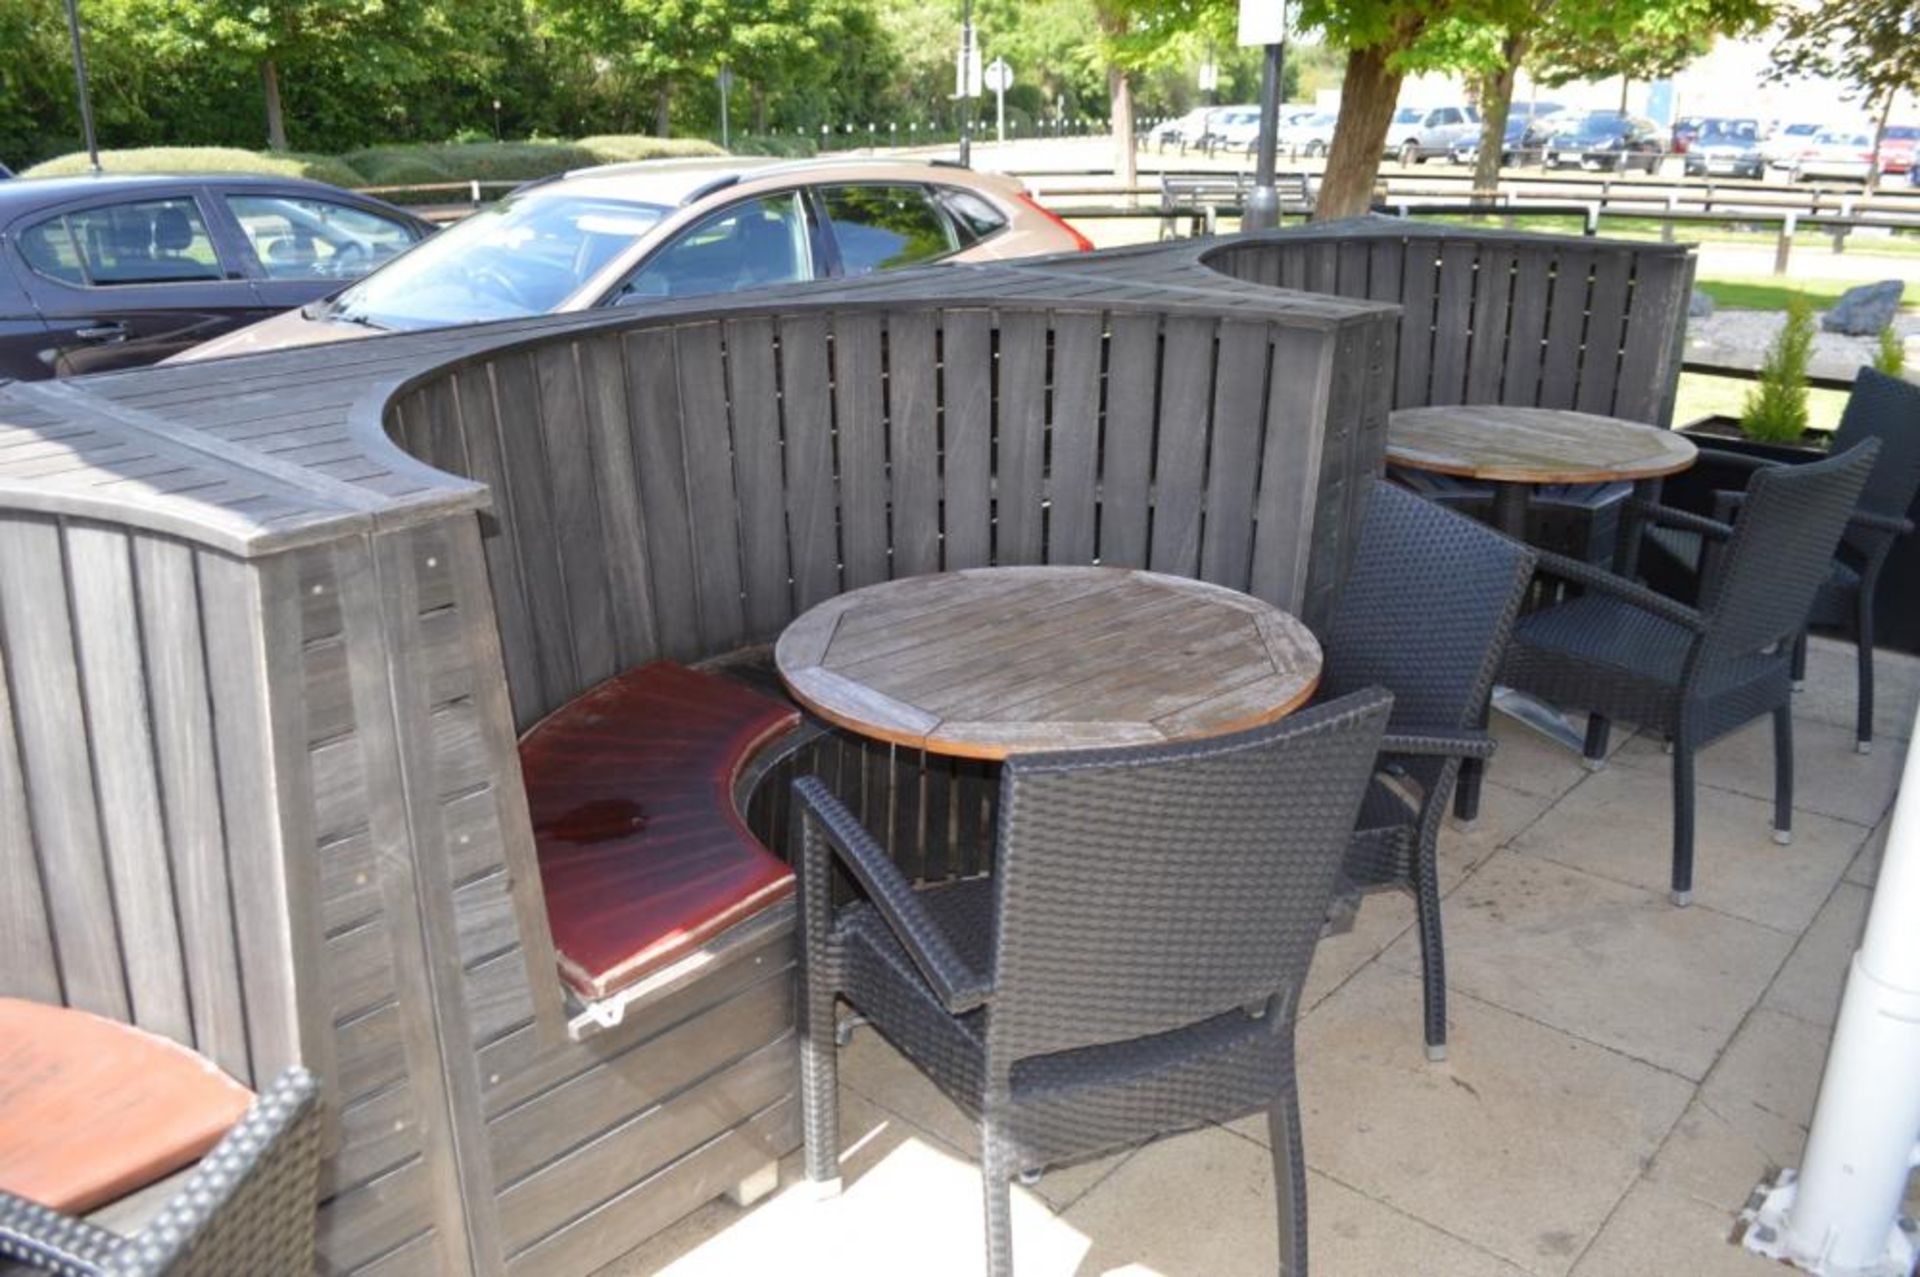 2 x Wooden Outdoor Seating Booths - Each Measure H111 x W203 x D106 cms - CL390 - Location: - Image 7 of 9